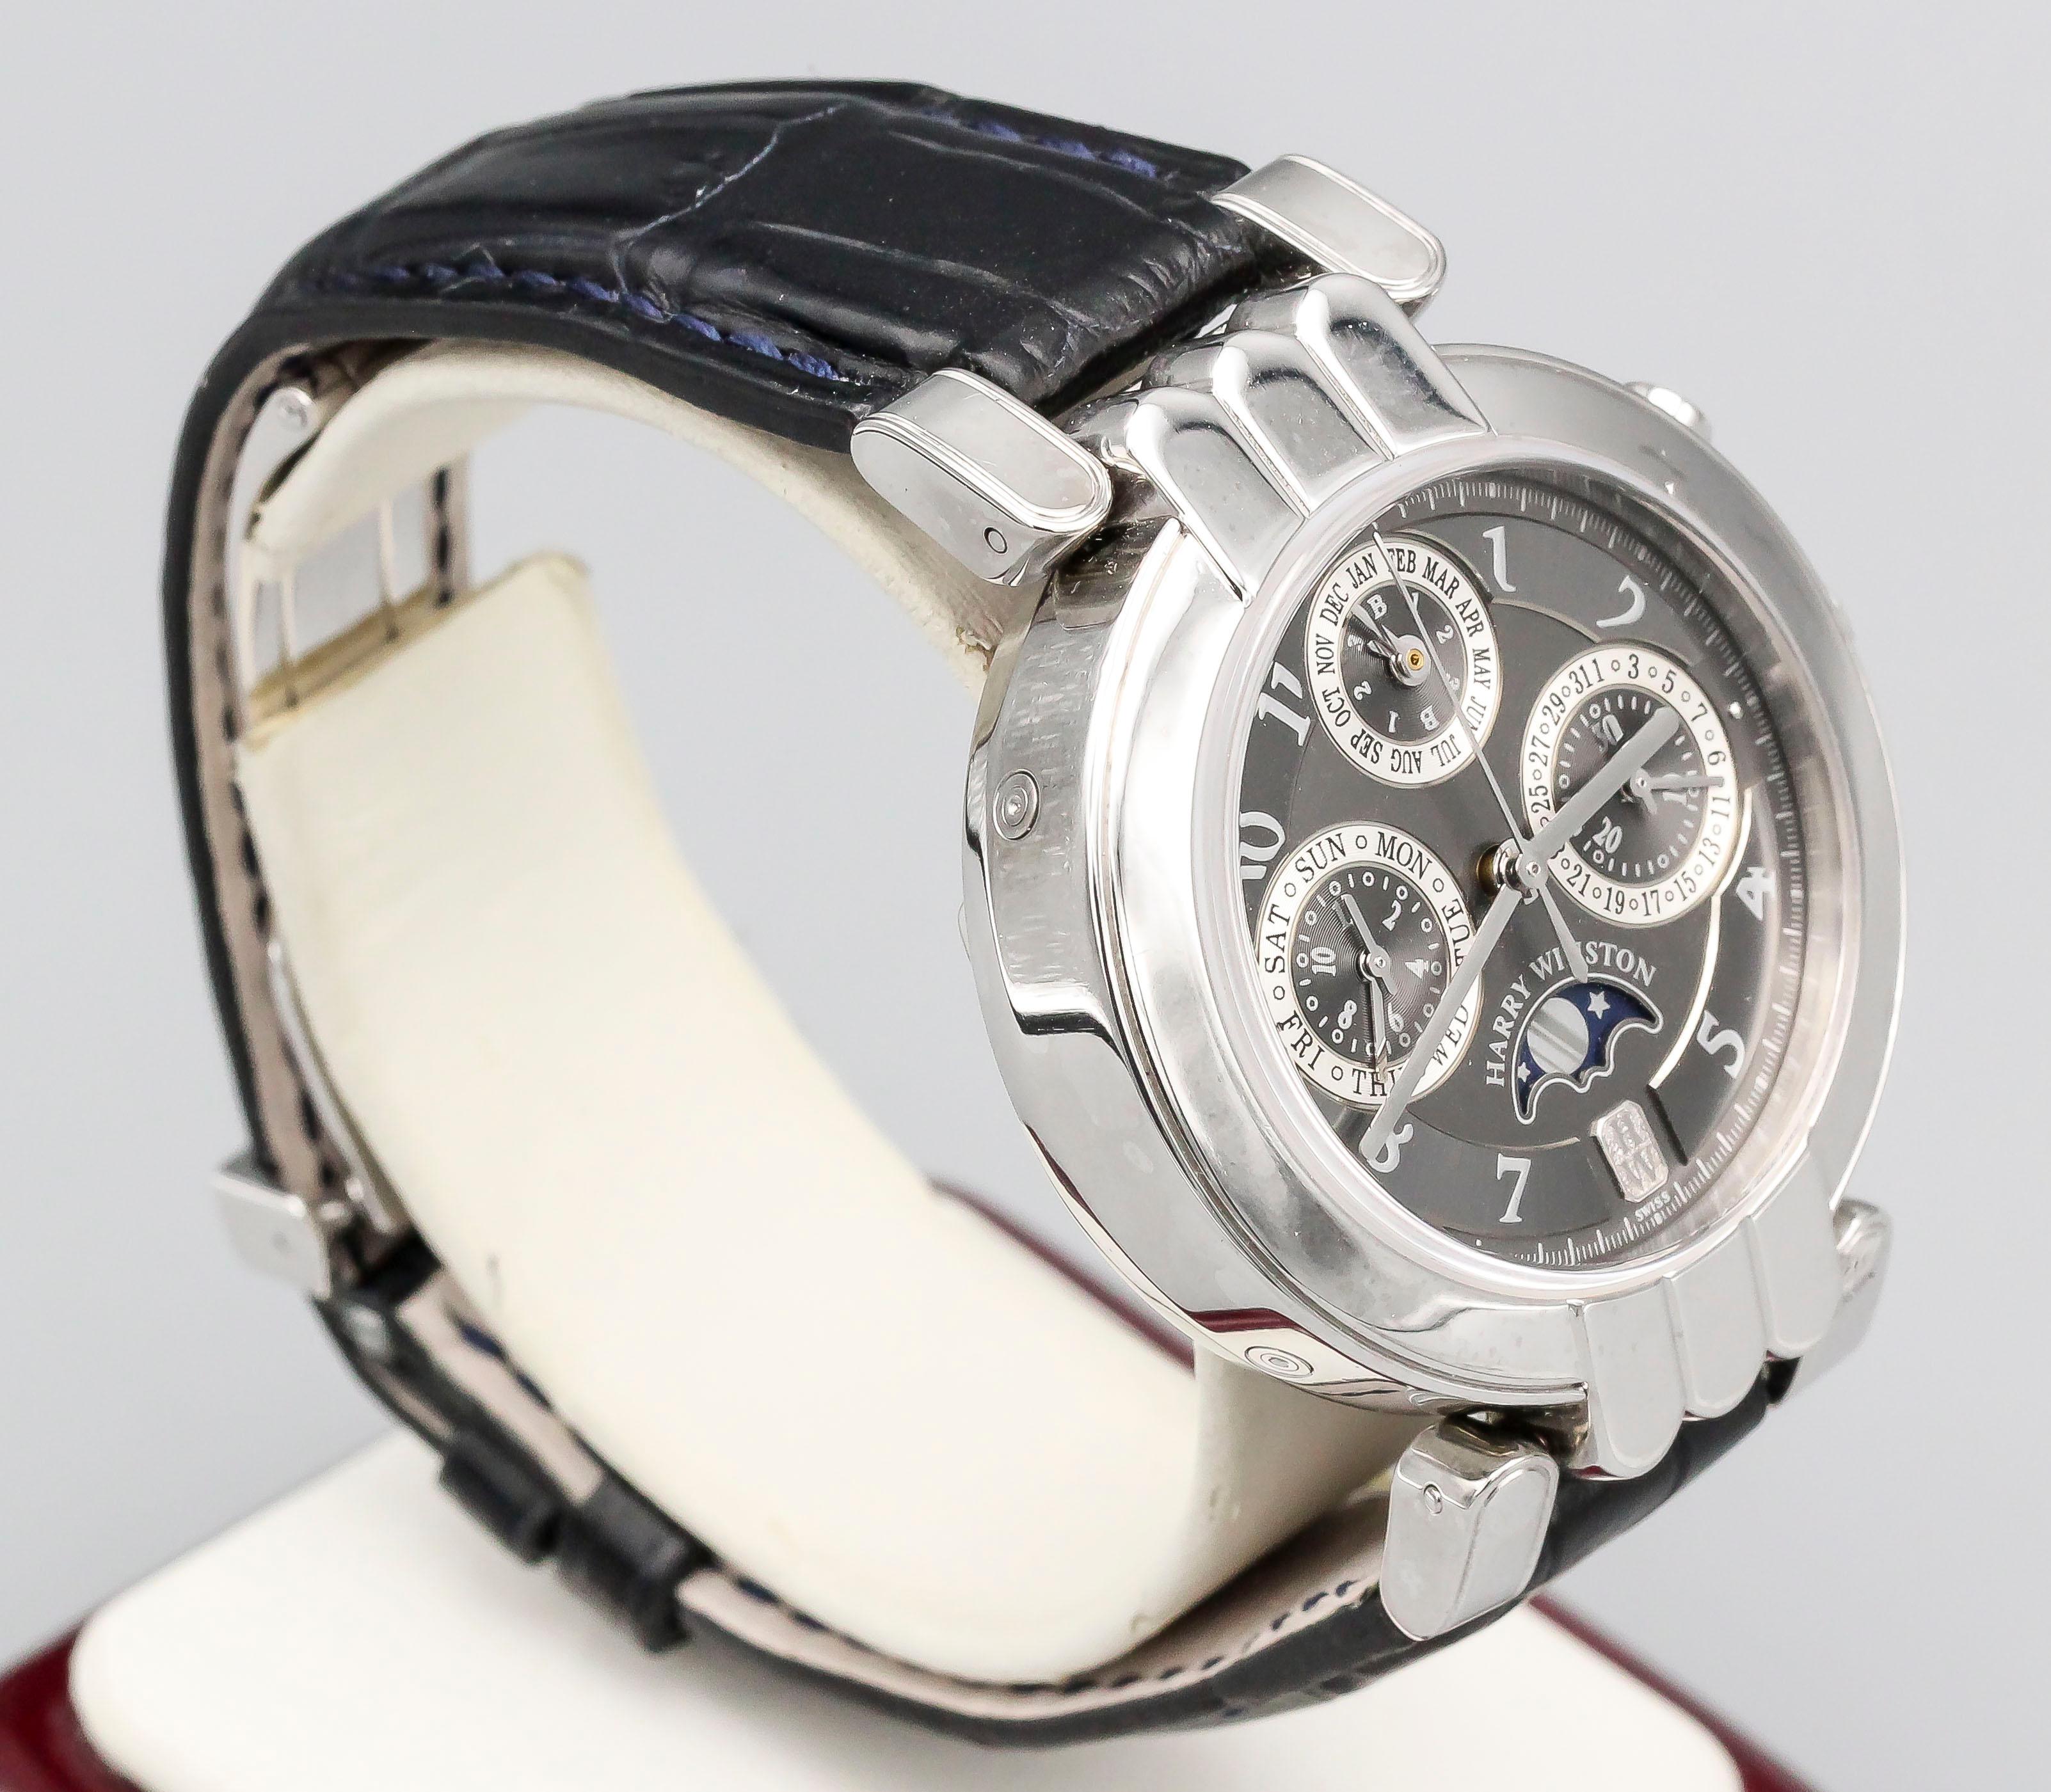 Handsome limited edition platinum wrist watch from the 